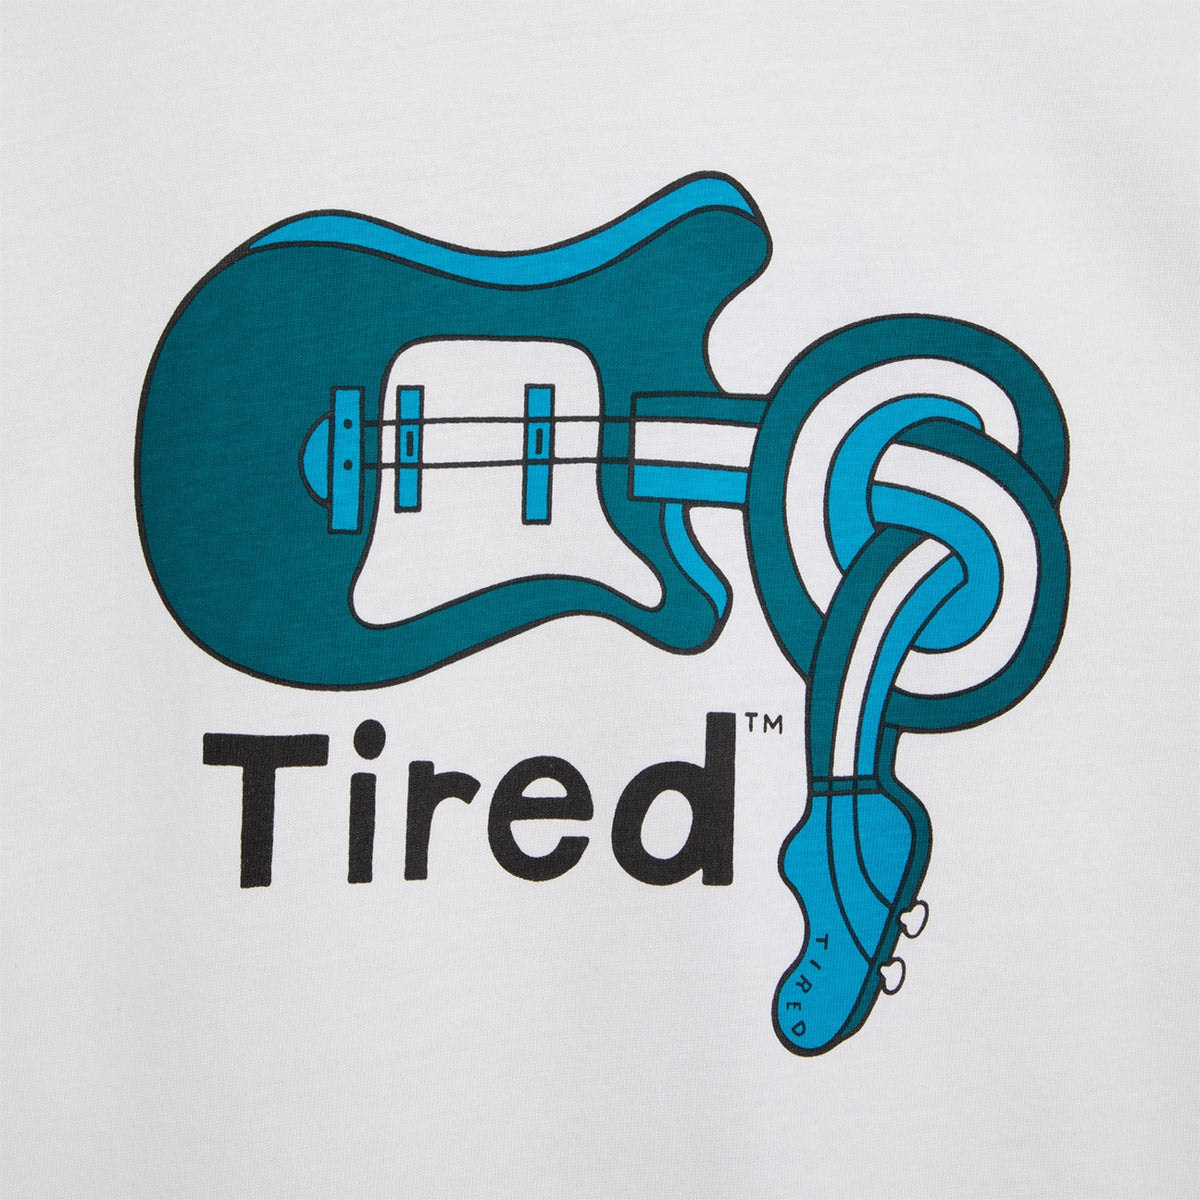 Spinal Tee - White